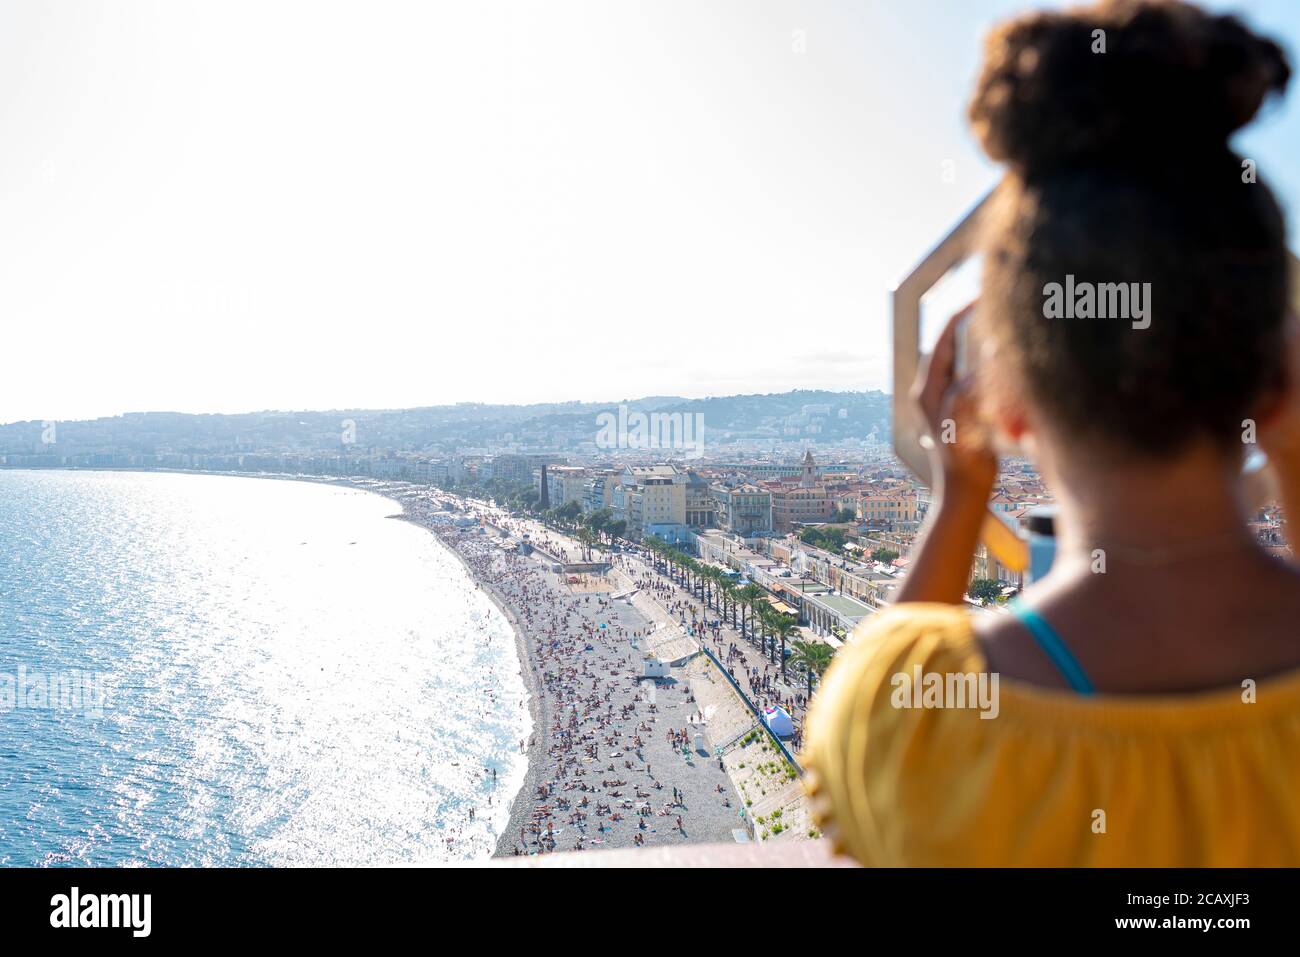 Child is looking through coin operated binoculars at the Bay of Angels in Nice, France Stock Photo